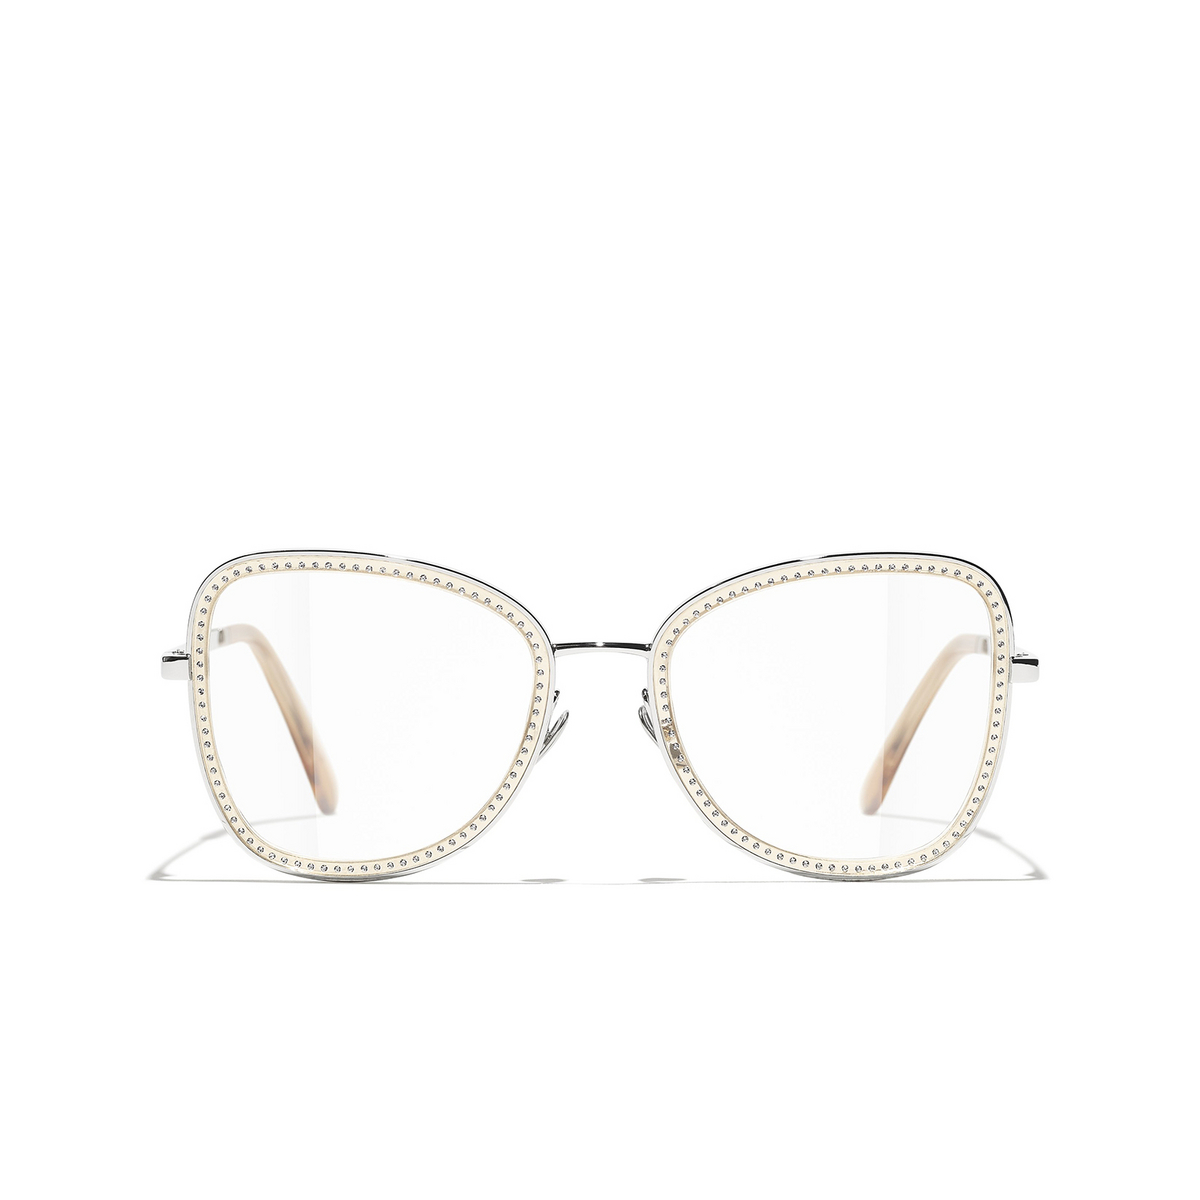 CHANEL square Eyeglasses C124 Silver - front view